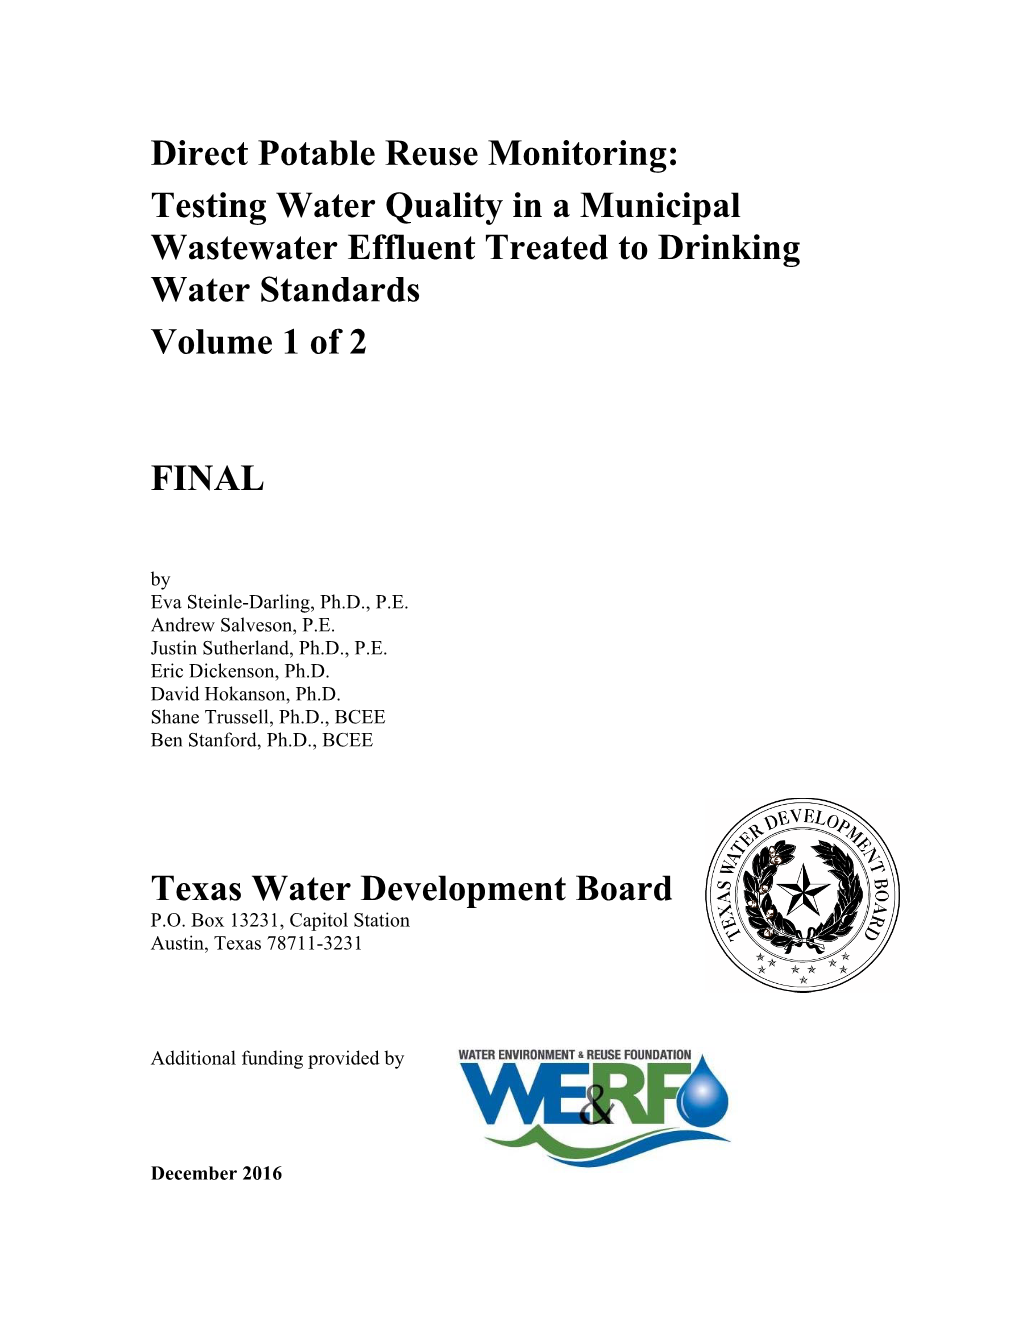 Direct Potable Reuse Monitoring: Testing Water Quality in a Municipal Wastewater Effluent Treated to Drinking Water Standards Volume 1 of 2